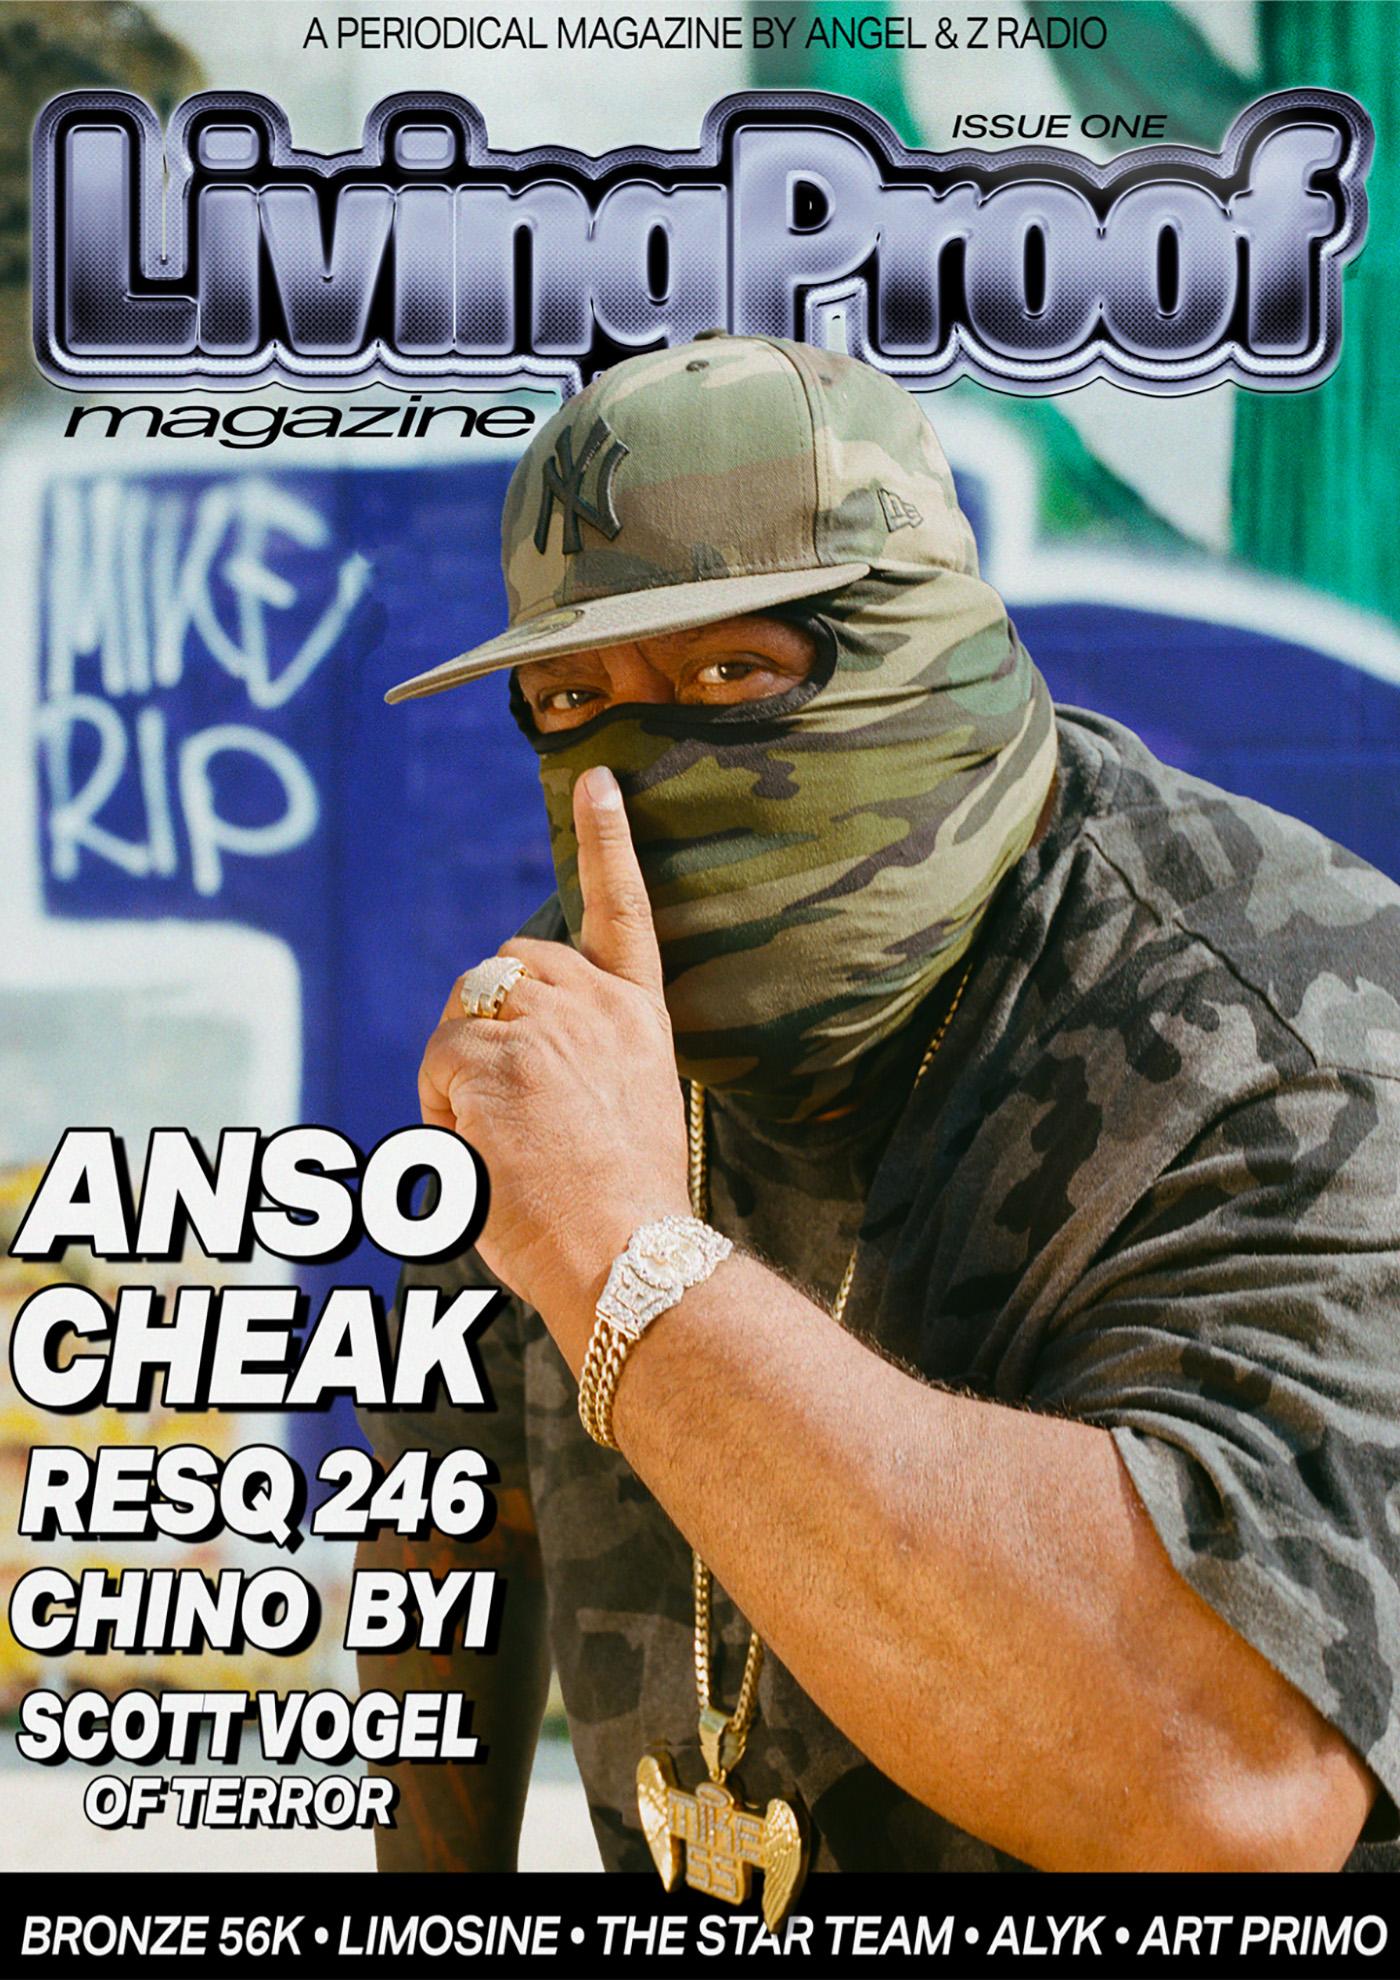 Living Proof Issue One featuring Anso, Cheak, Resq 246, Chino BYI, and Scott Vogel of Terror.